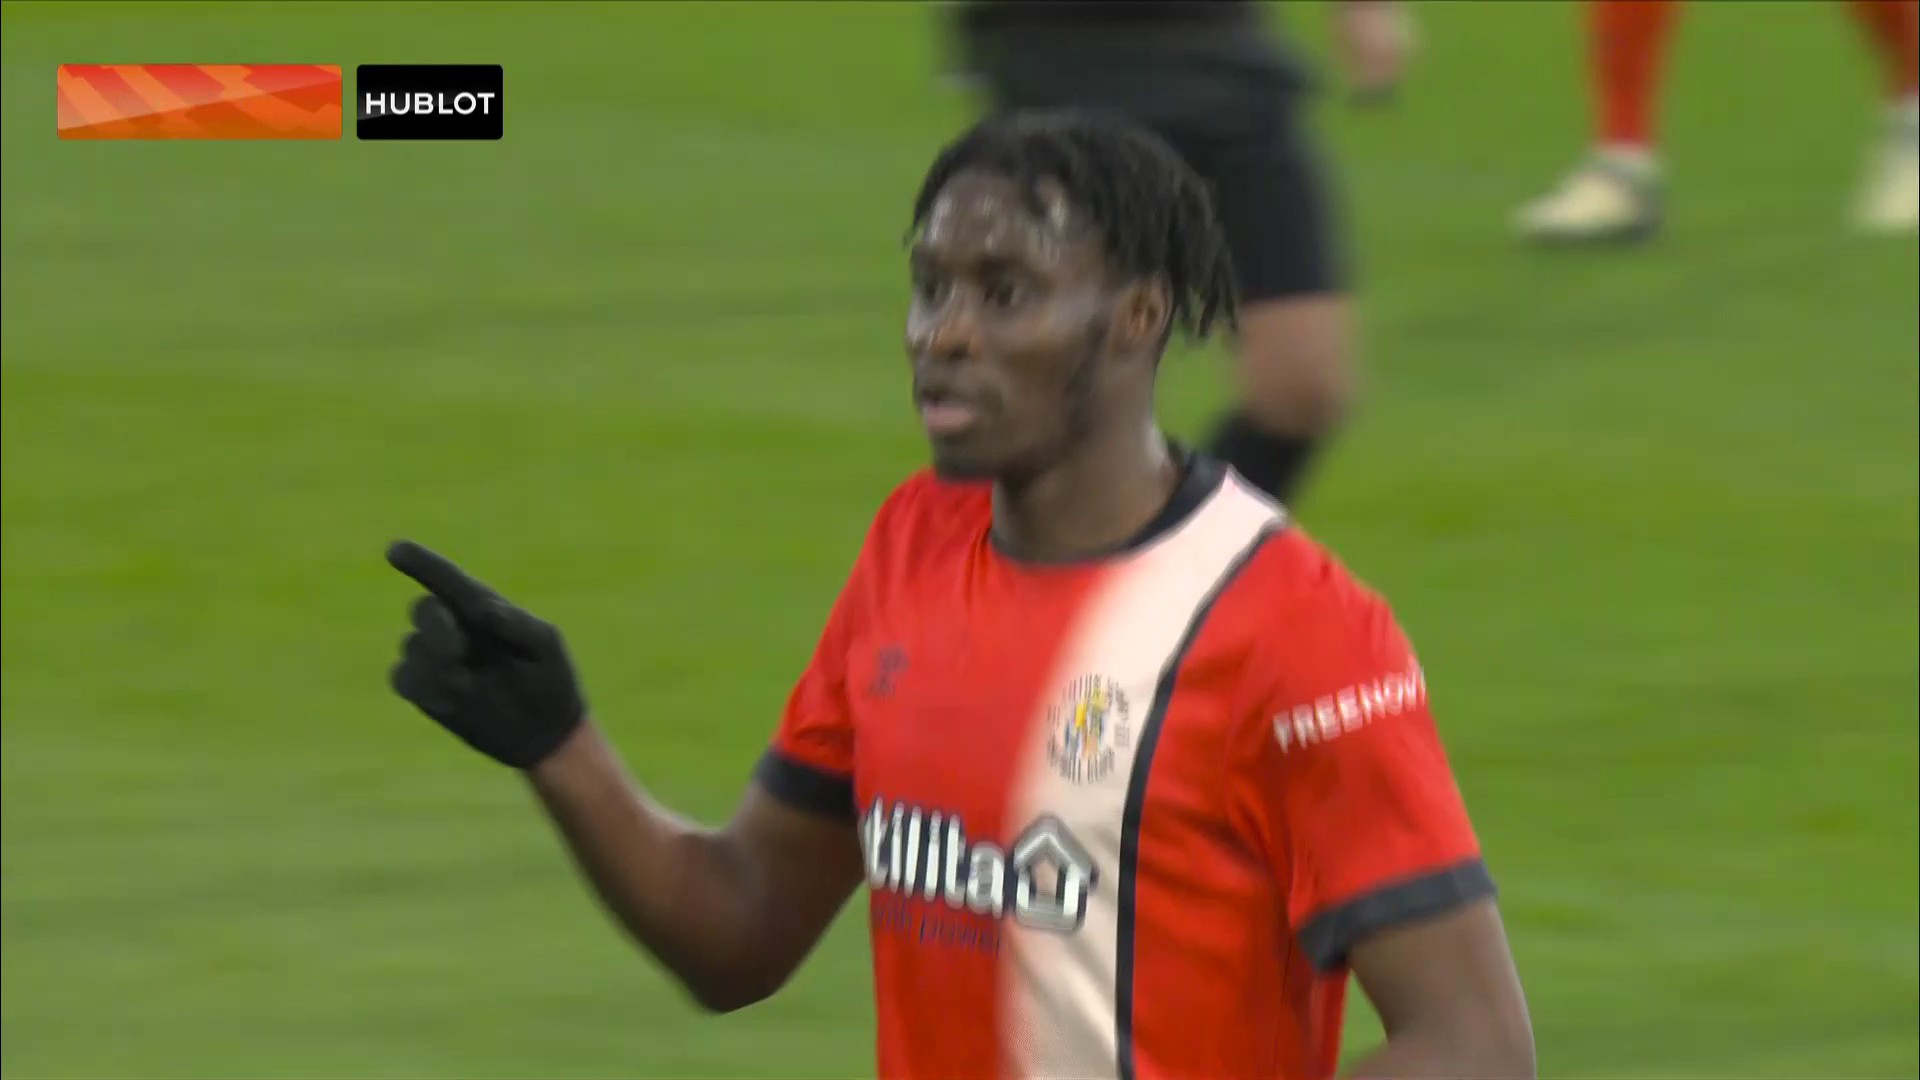 Video: Adebayo returns from injury to score crucial goal for Luton that takes them out of the relegation zone